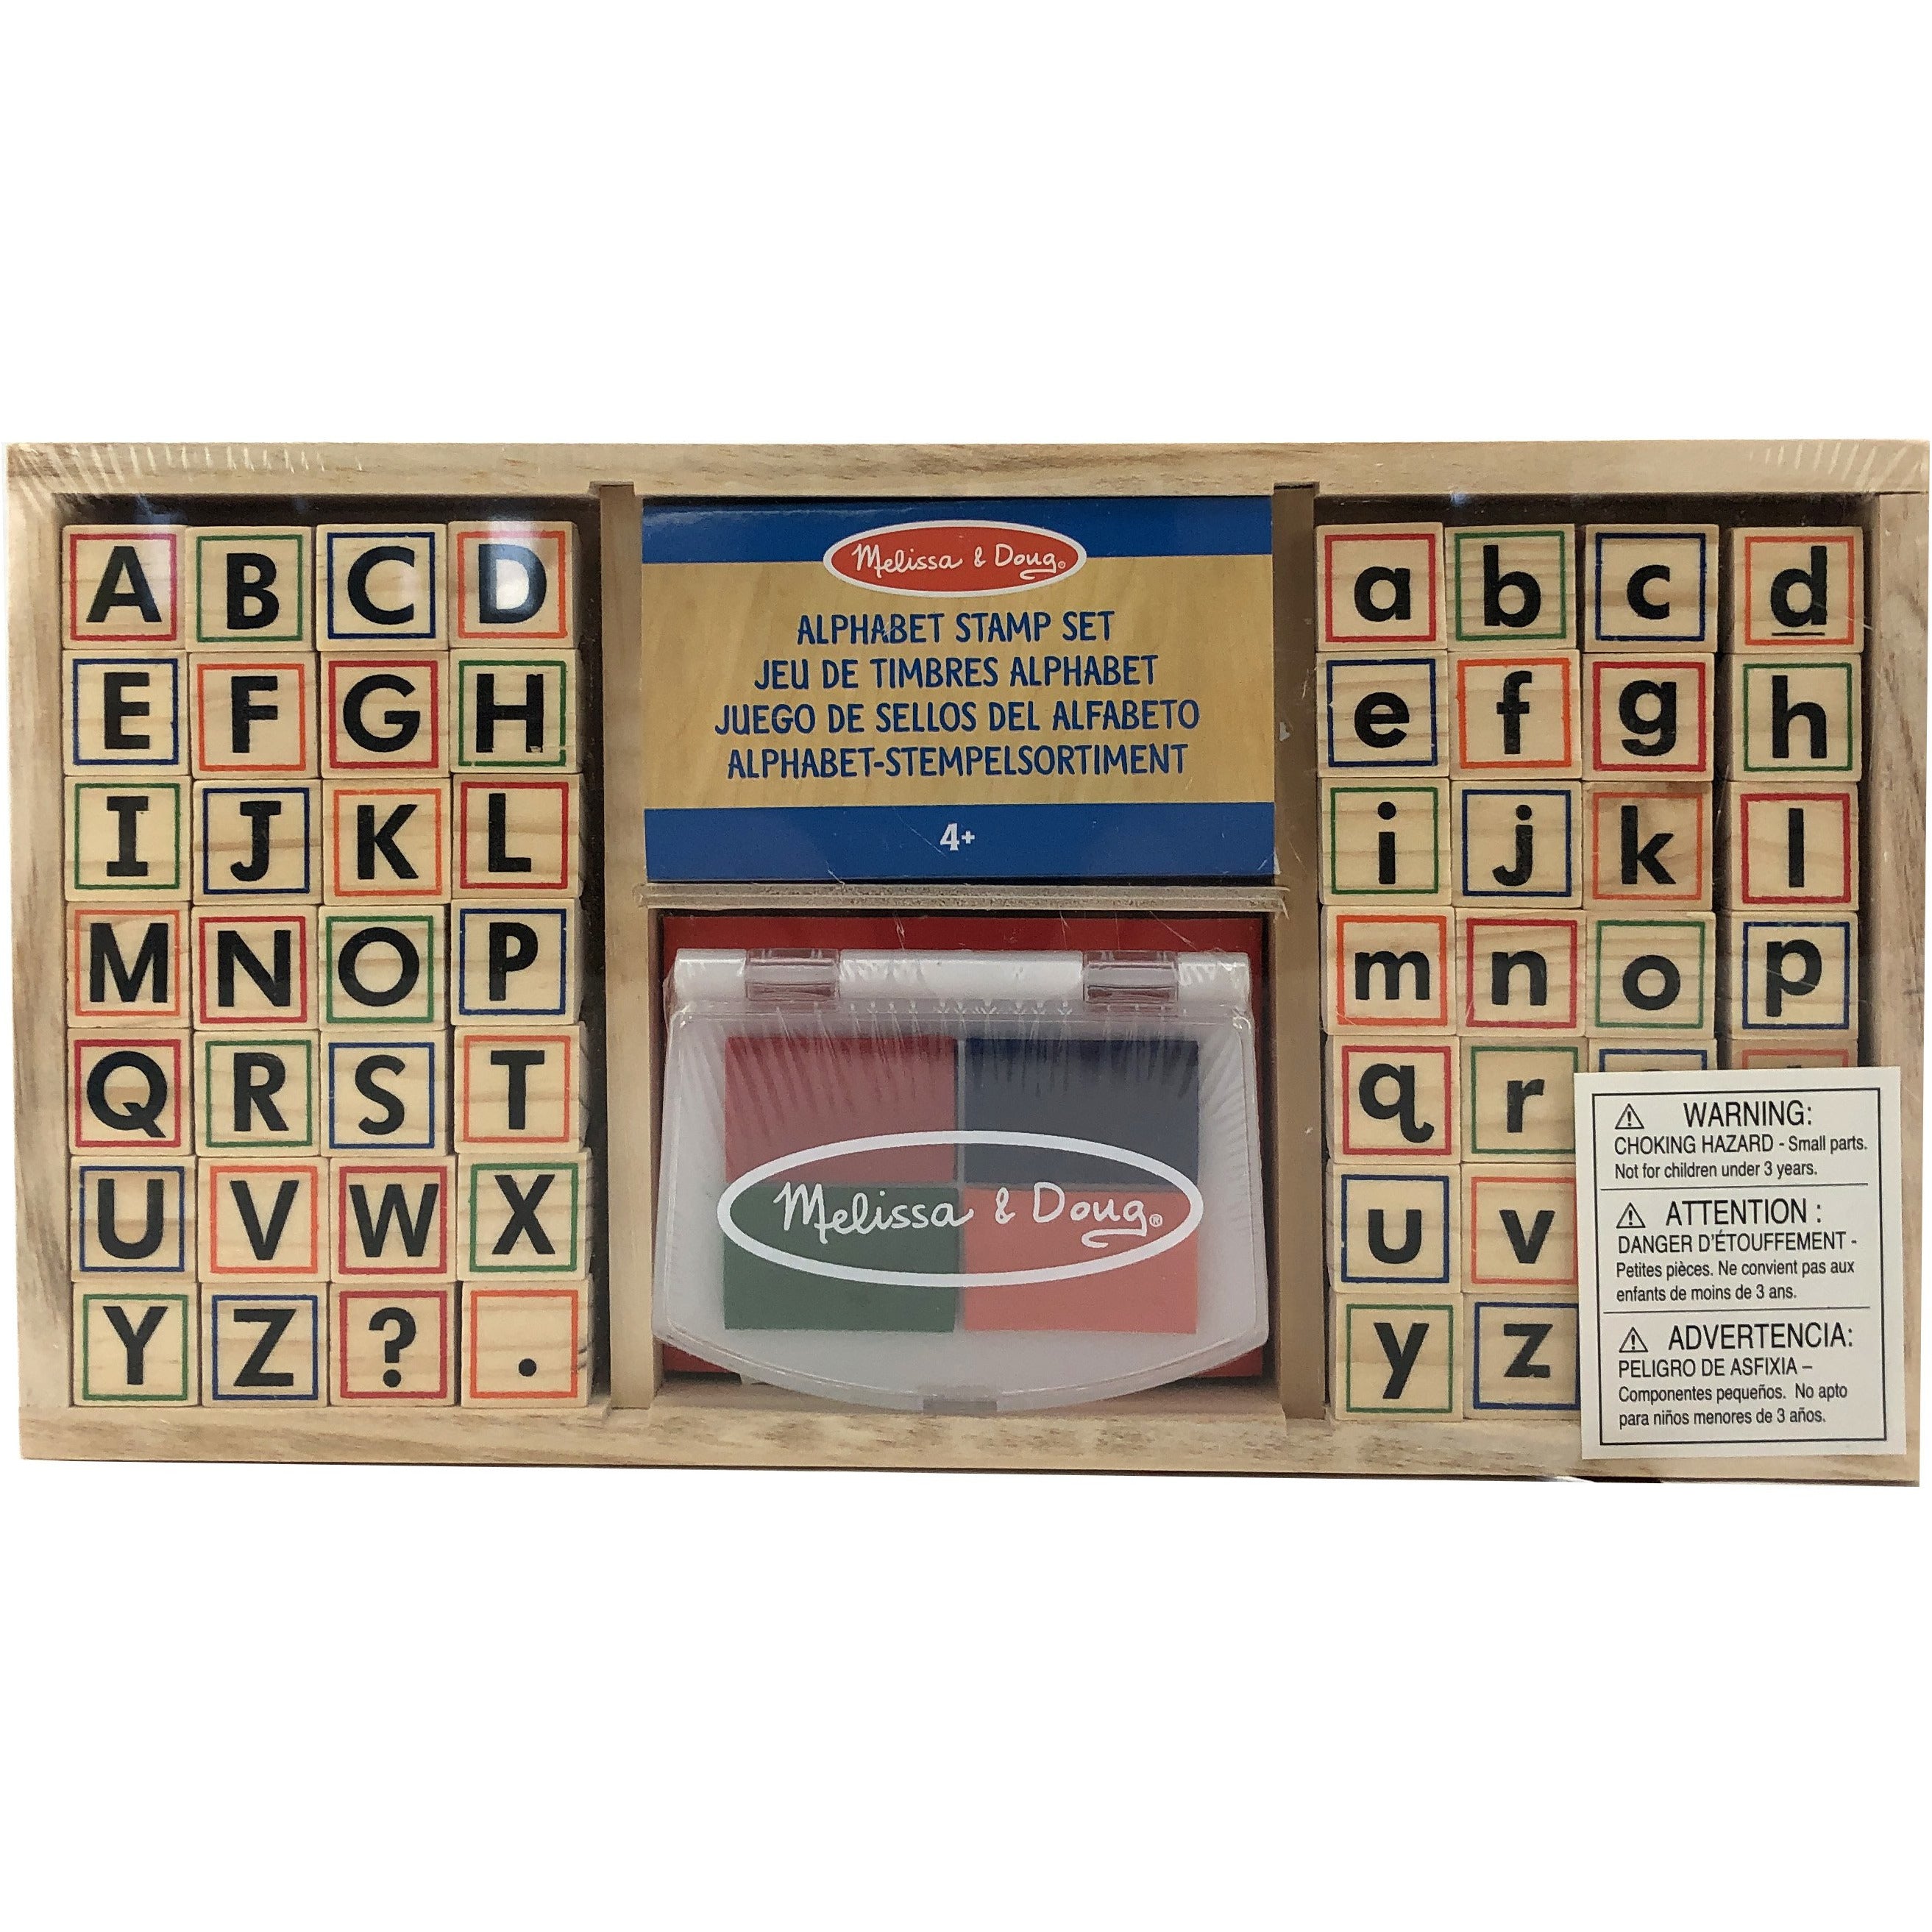 Kids alphabet Stamp toy made with real wood handles and multicolored stamp pad